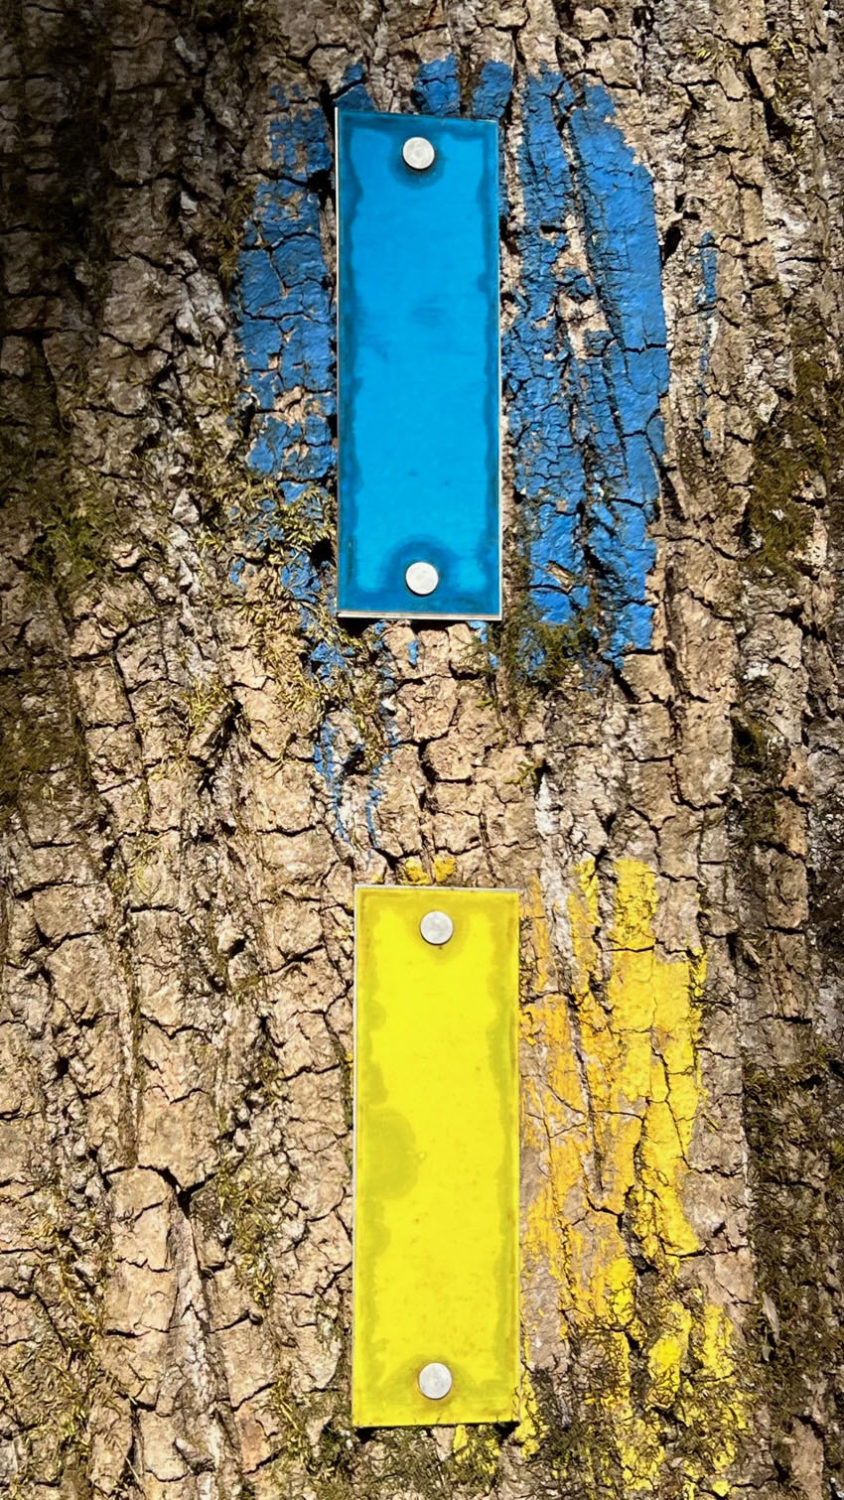 Trail blazes on the trunk of a tree, blue above yellow.